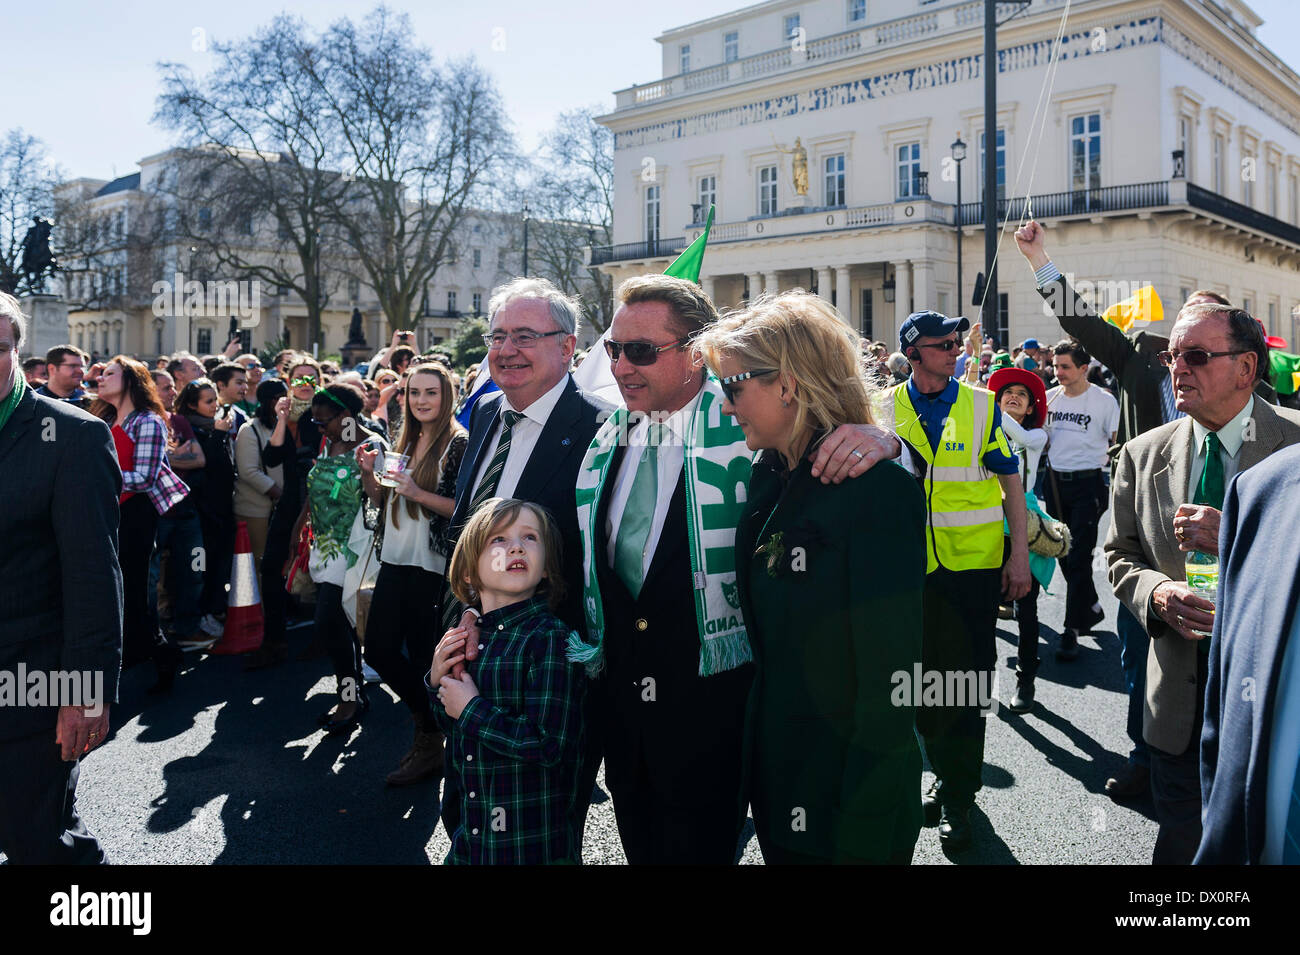 London, UK. 16 March 2014. Michael Flatley and his family lead the annual St Patrick's day parade in London.  Photographer:  Gordon Scammell/Alamy Live News Stock Photo